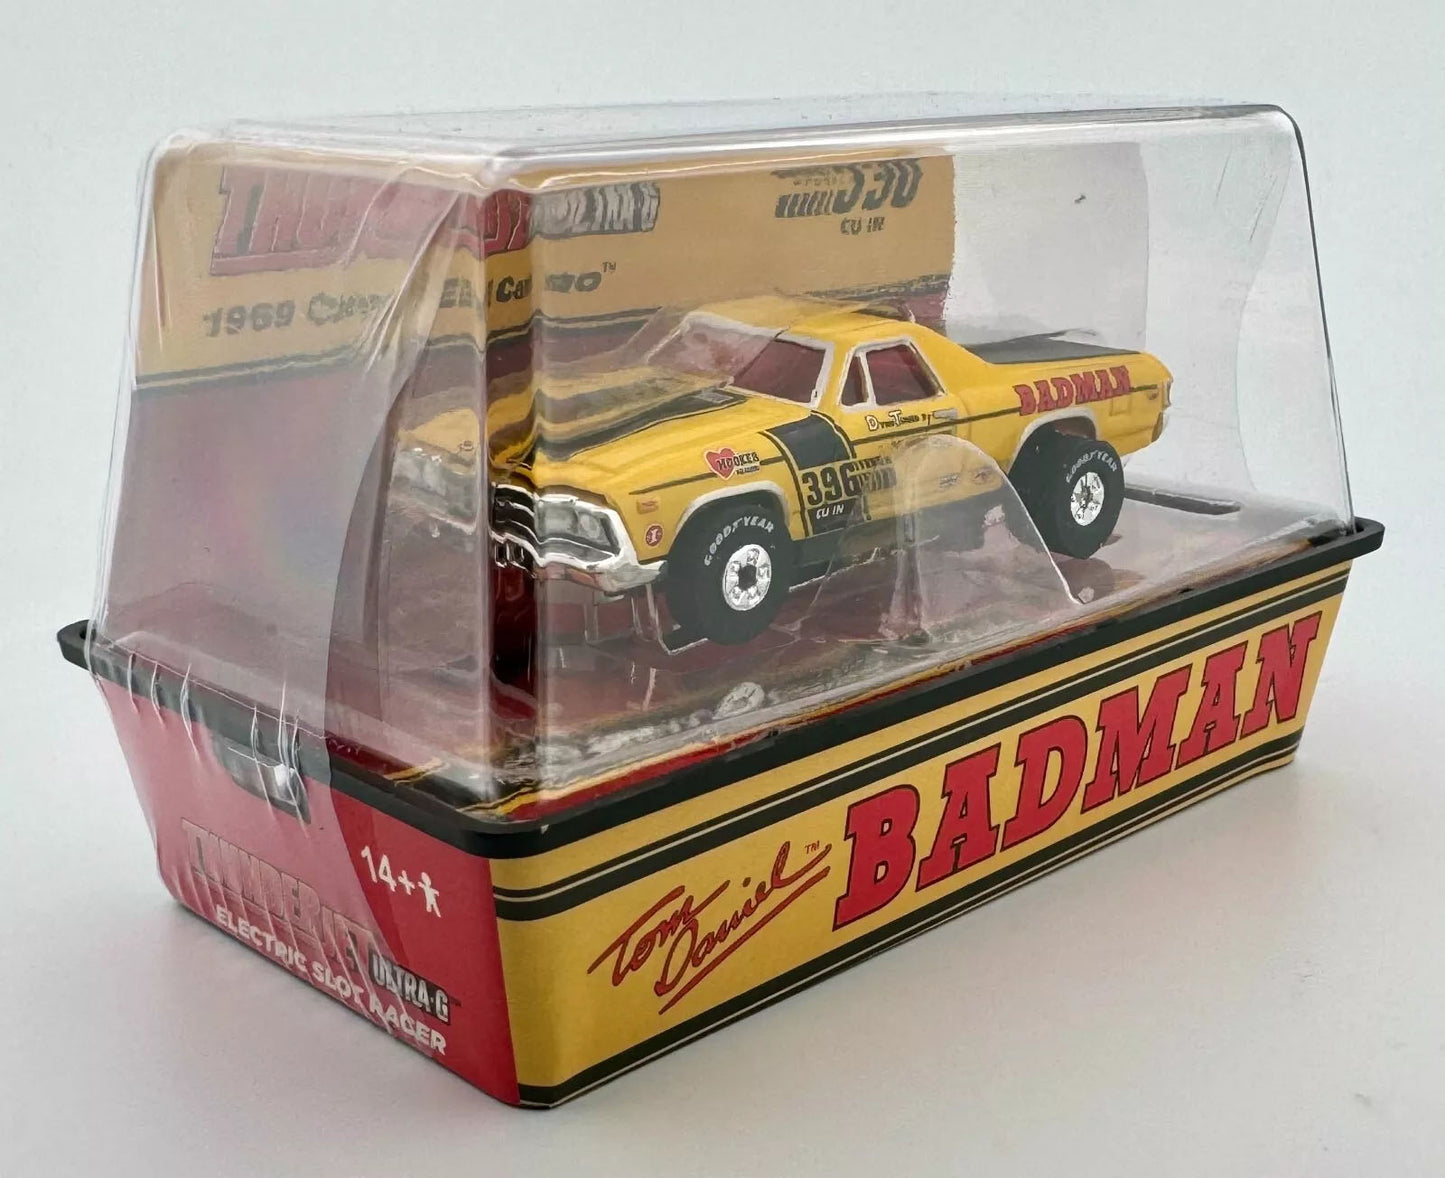 Auto World '69 Chevy El Camino Badman Exclusive HO Slot Car for AFX Limited Edition